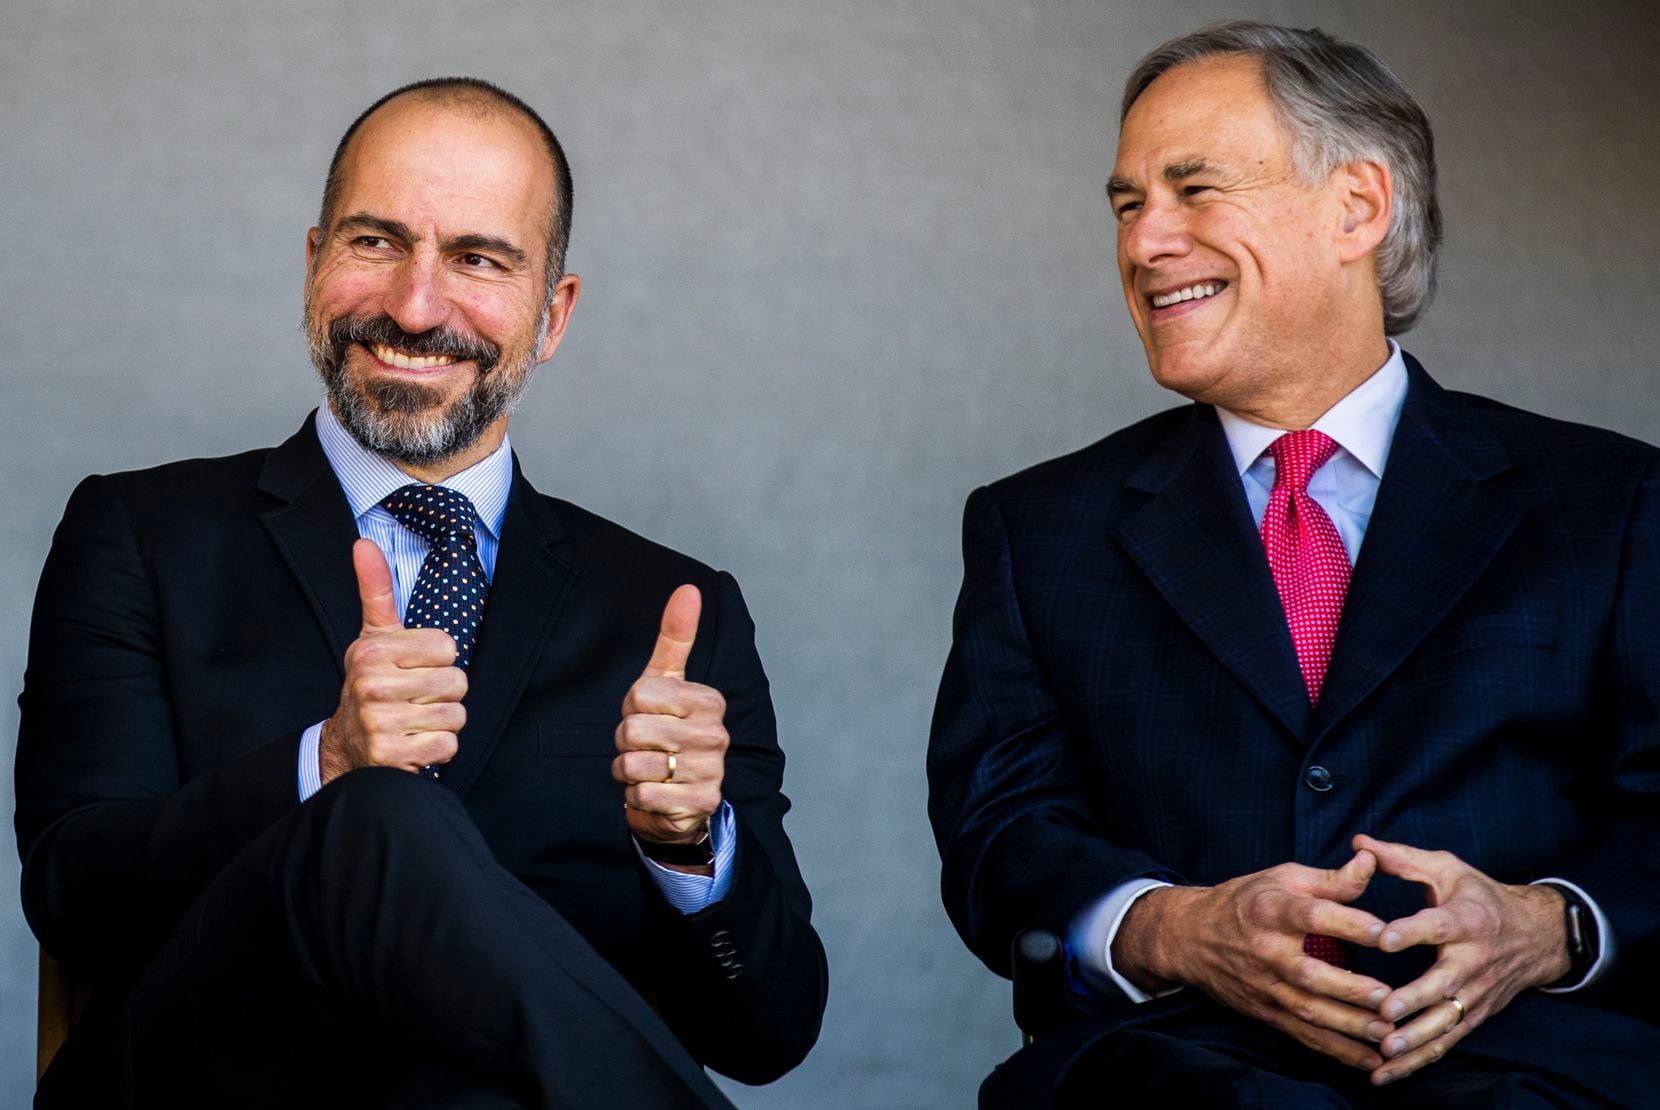 Uber CEO Dara Khosrowshahi gives a thumbs up next to Gov. Greg Abbott at a ground breaking ceremony for a new Uber Deep Ellum office on Friday, November 1, 2019 in Dallas. (Ashley Landis/The Dallas Morning News)